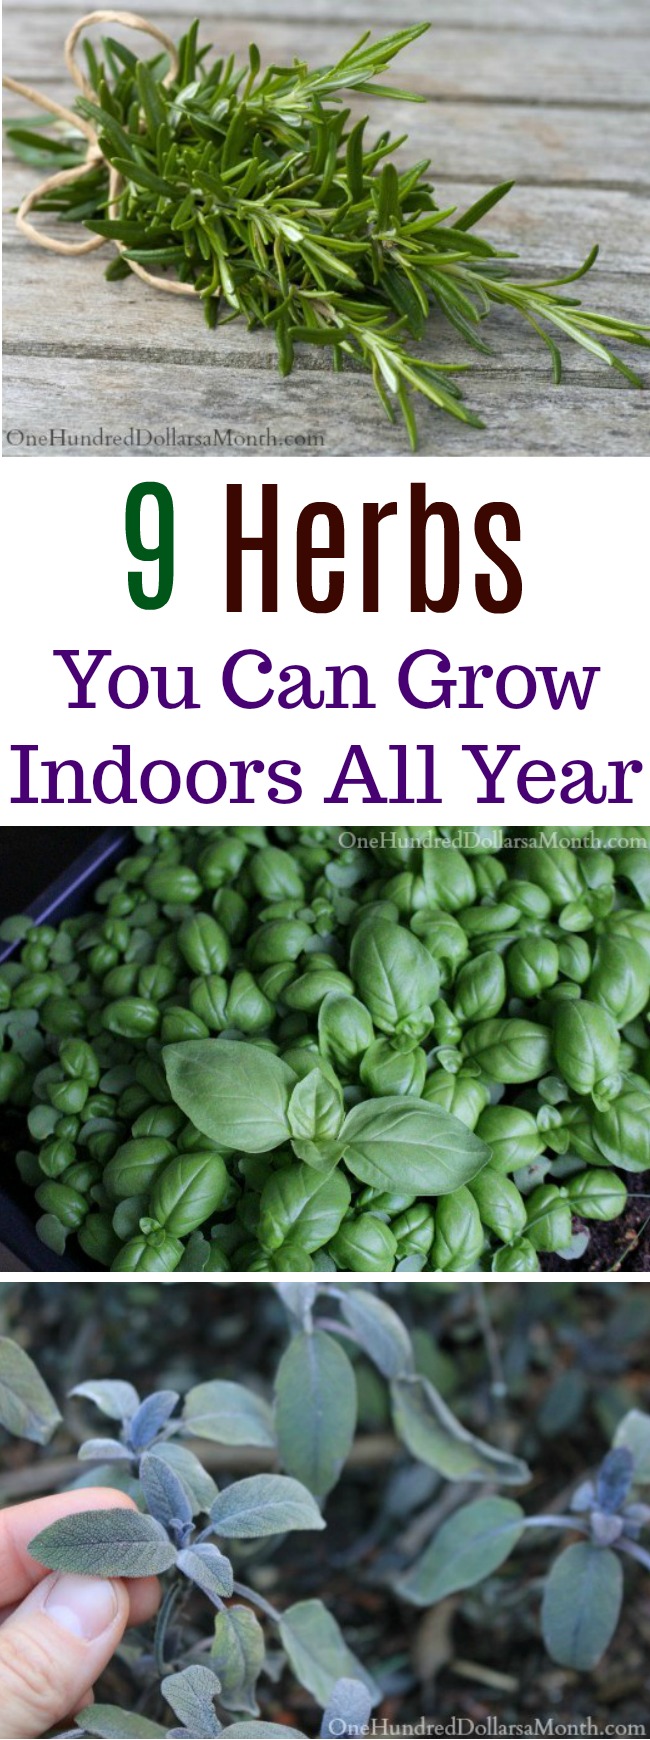 9 Herbs You Can Grow Indoors All Year